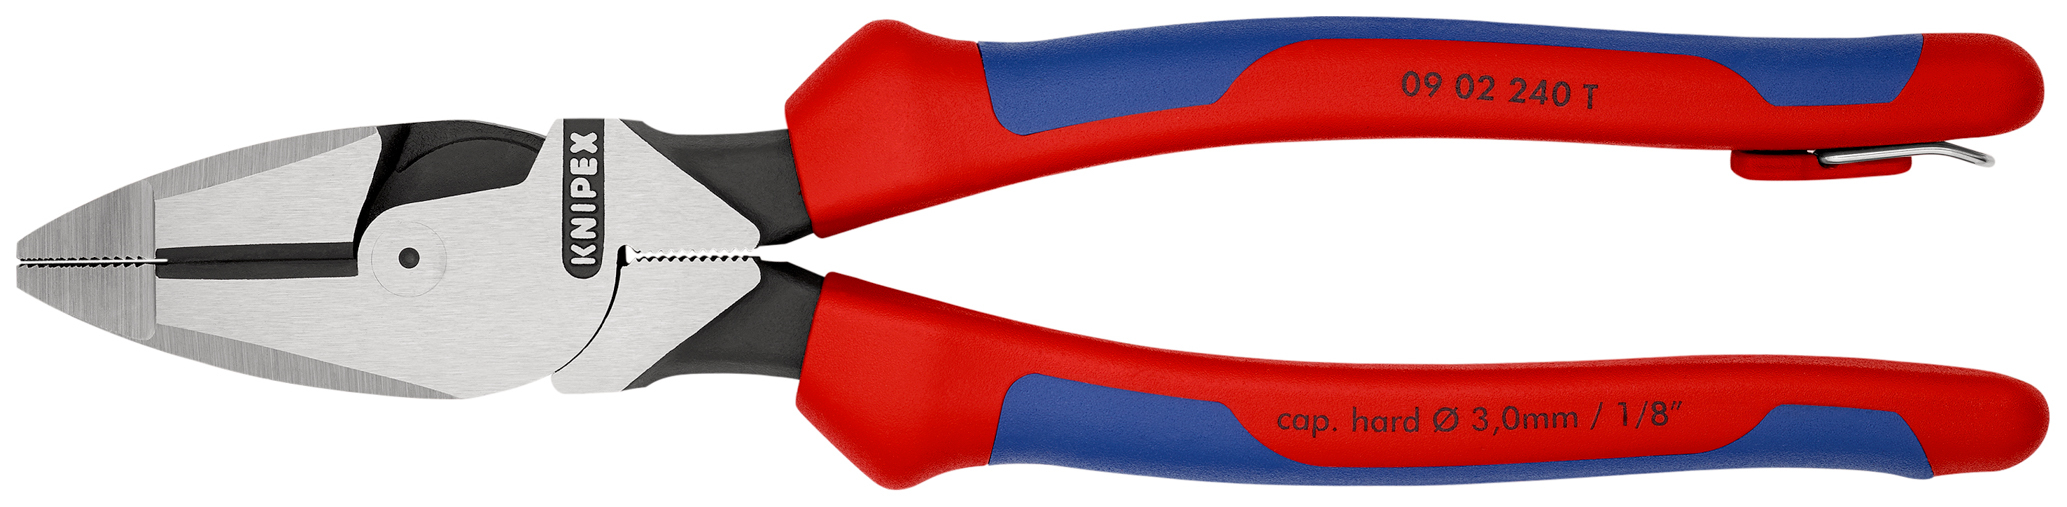 Pince univers. lineman 240mm antichute KNIPEX - 09 02 240 T